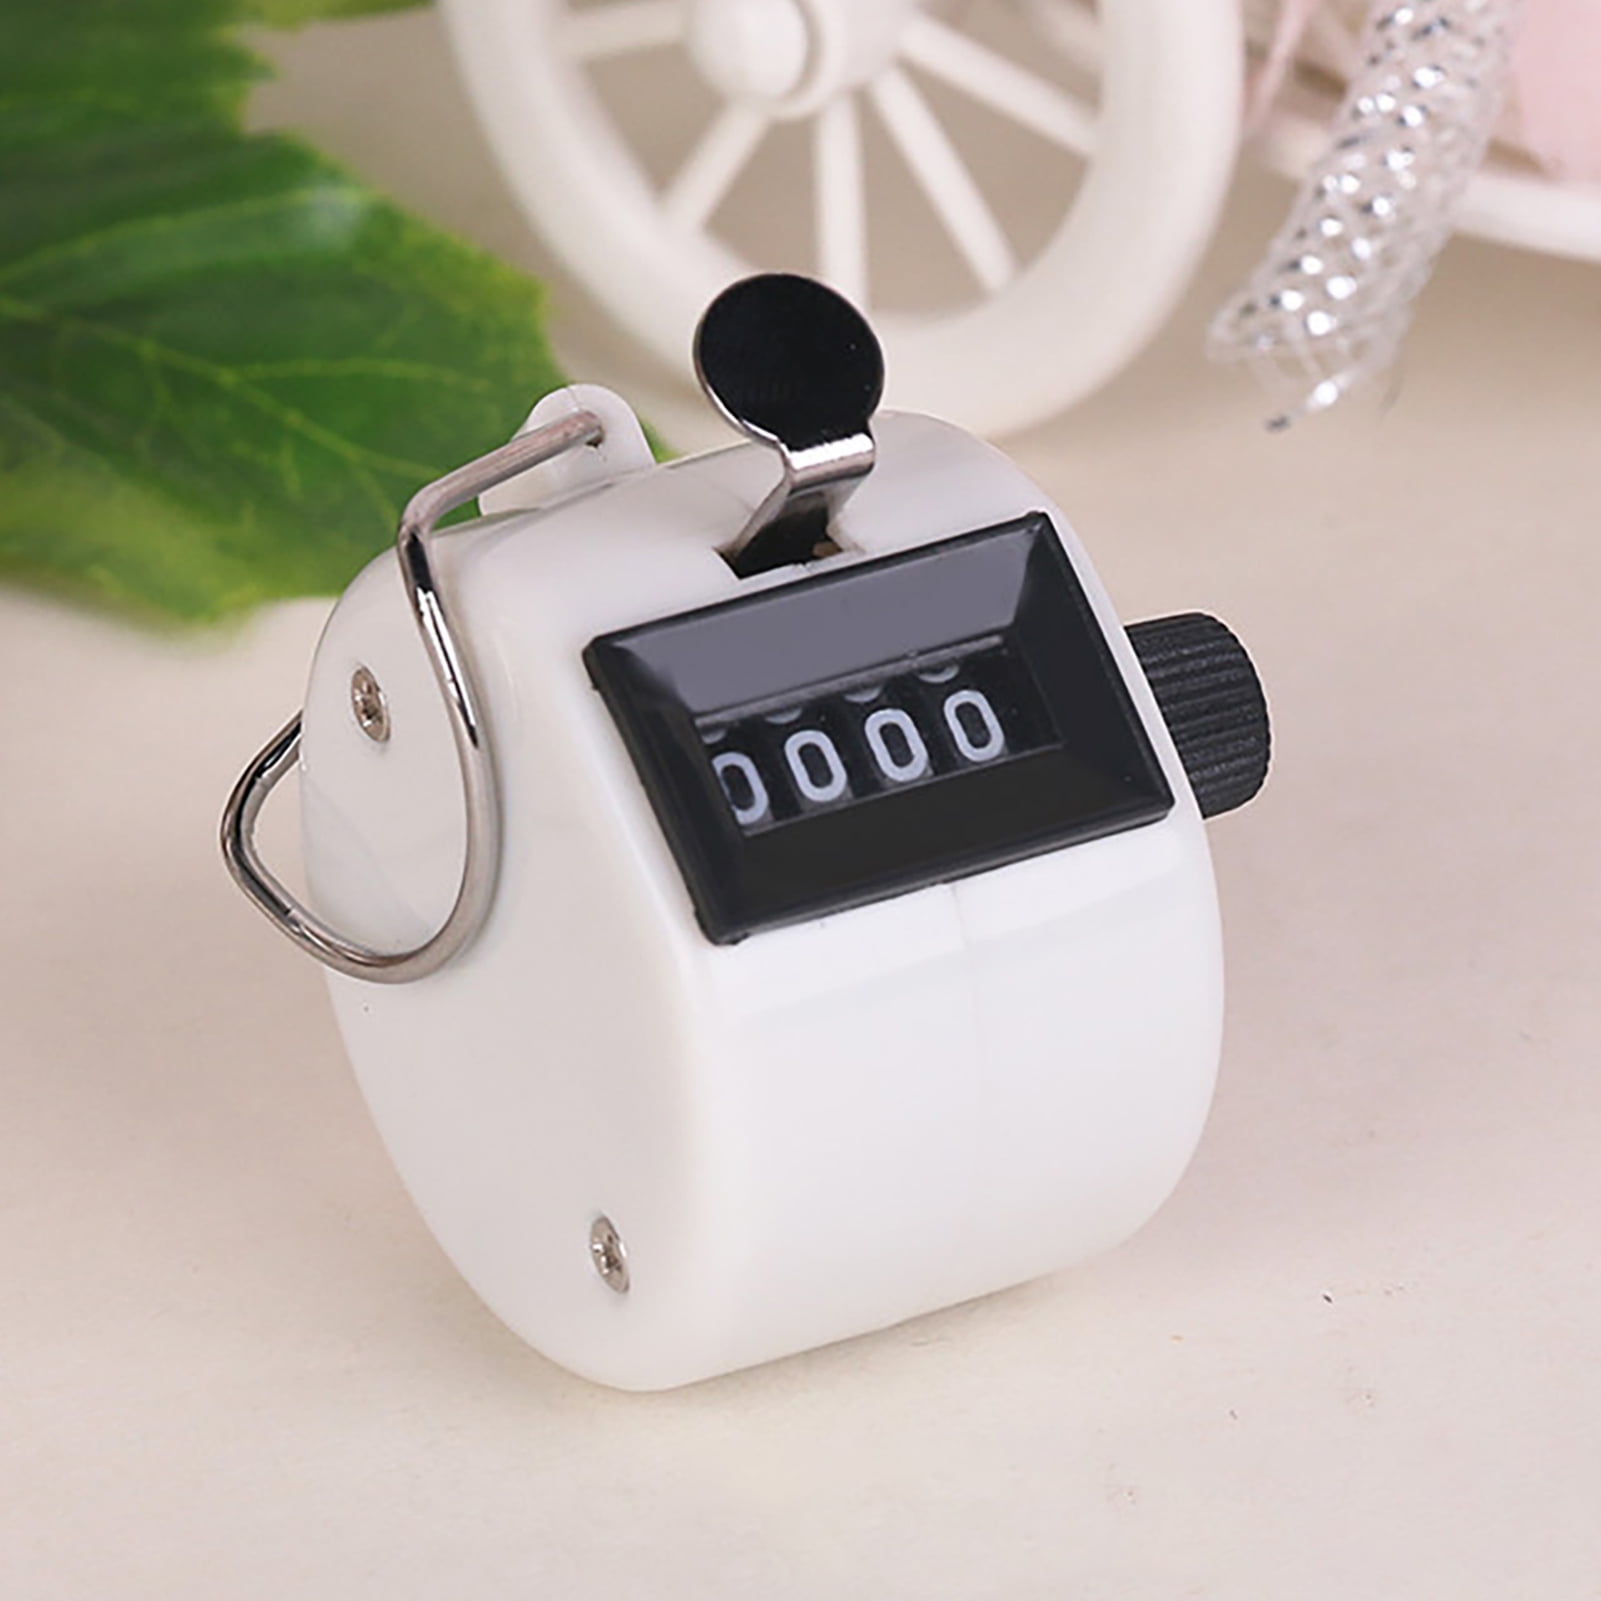 4 Digit Manual Sale Hand Held Number Clicker Tally Counter High Quality LN